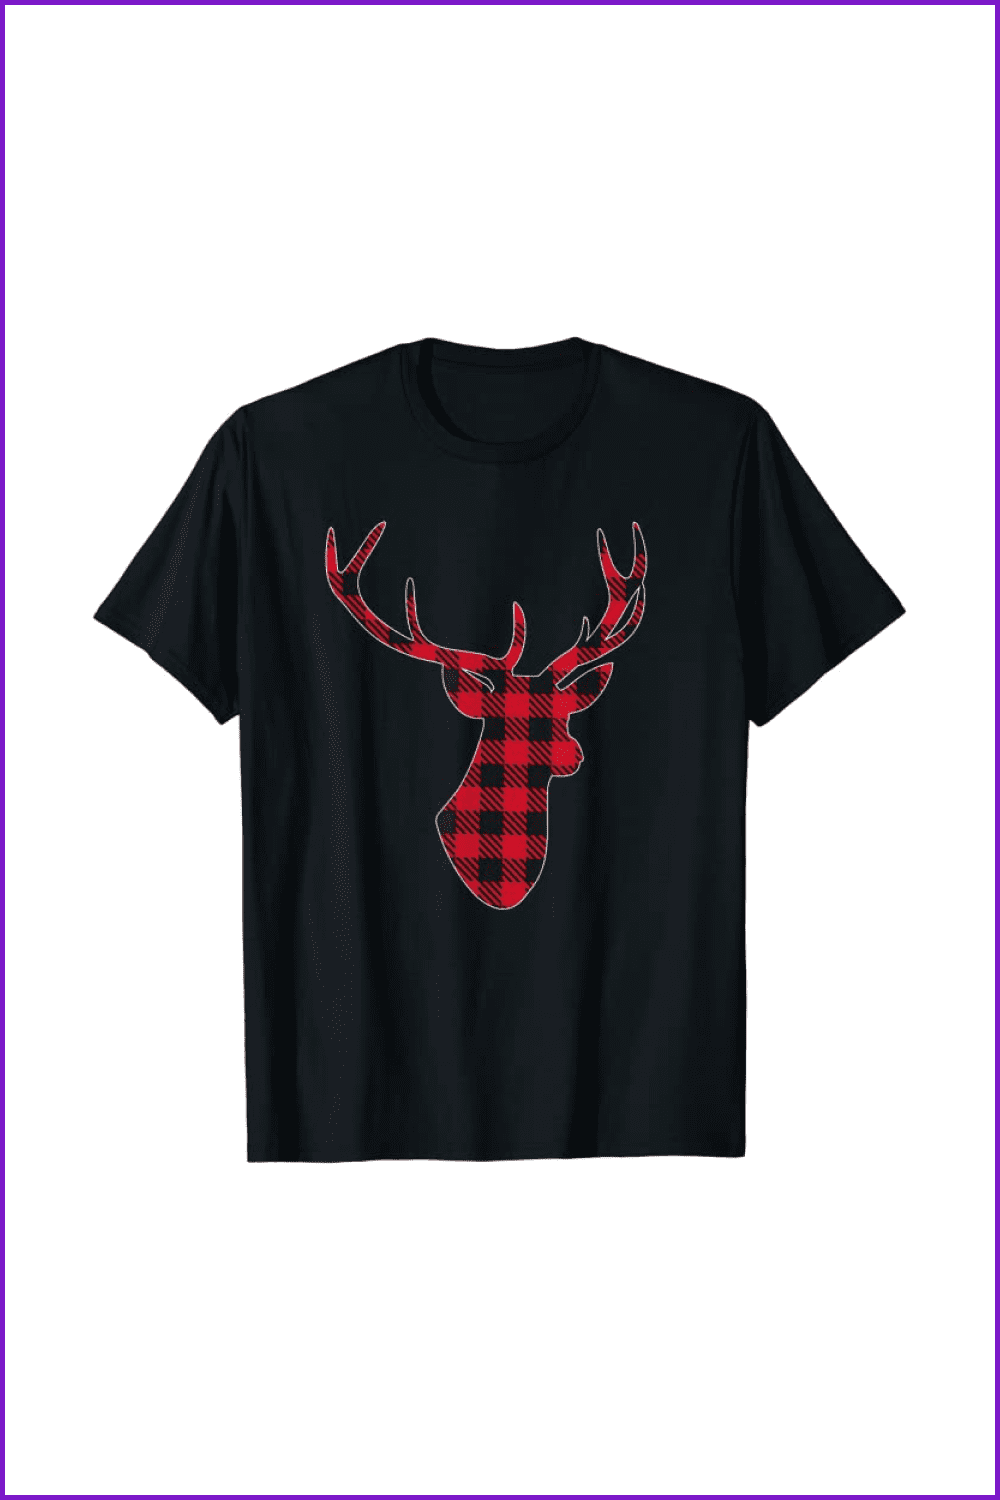 Black t-shirt with a deer in a checkered black and red print.